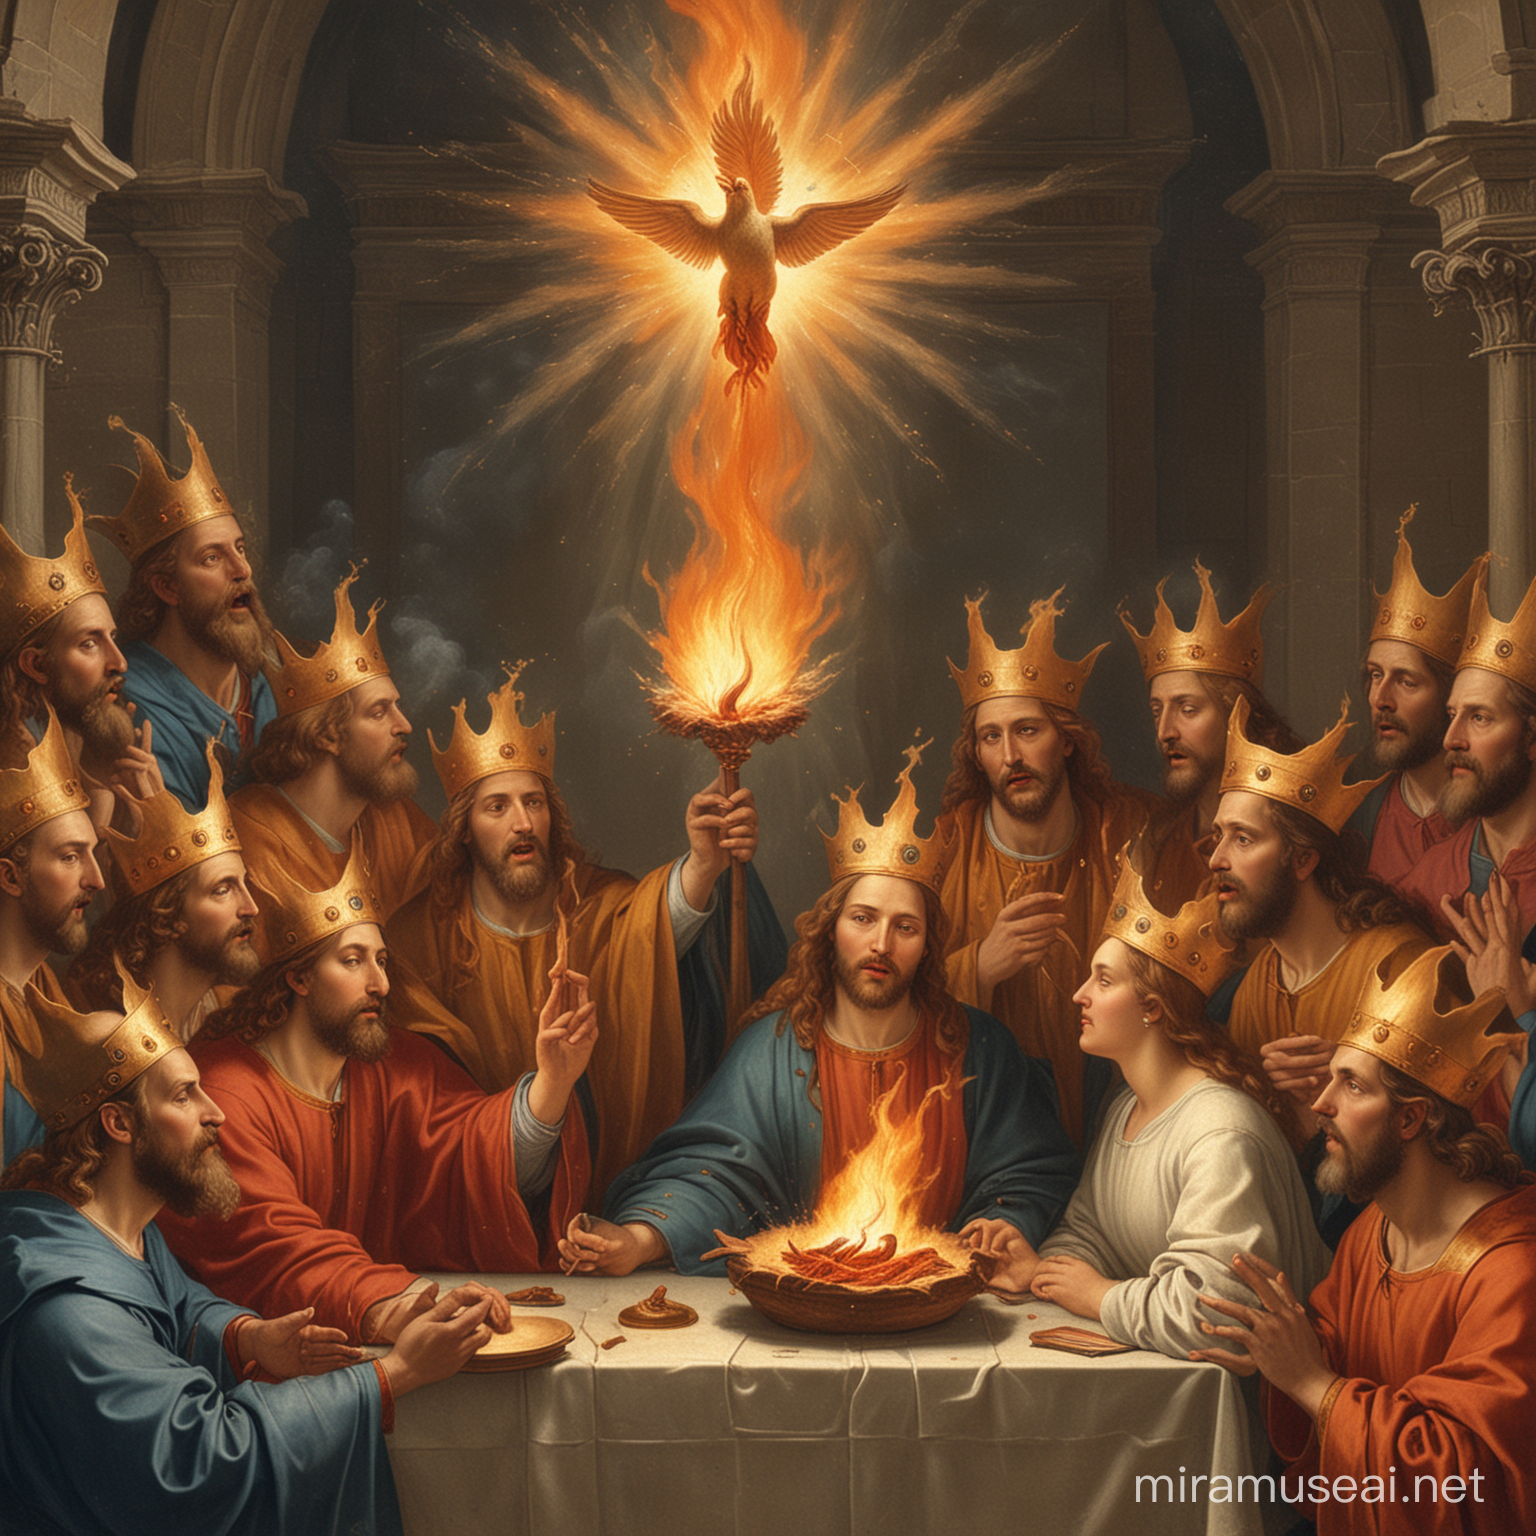 Pentecost in Reinassance era, single ember flame on top of their heads